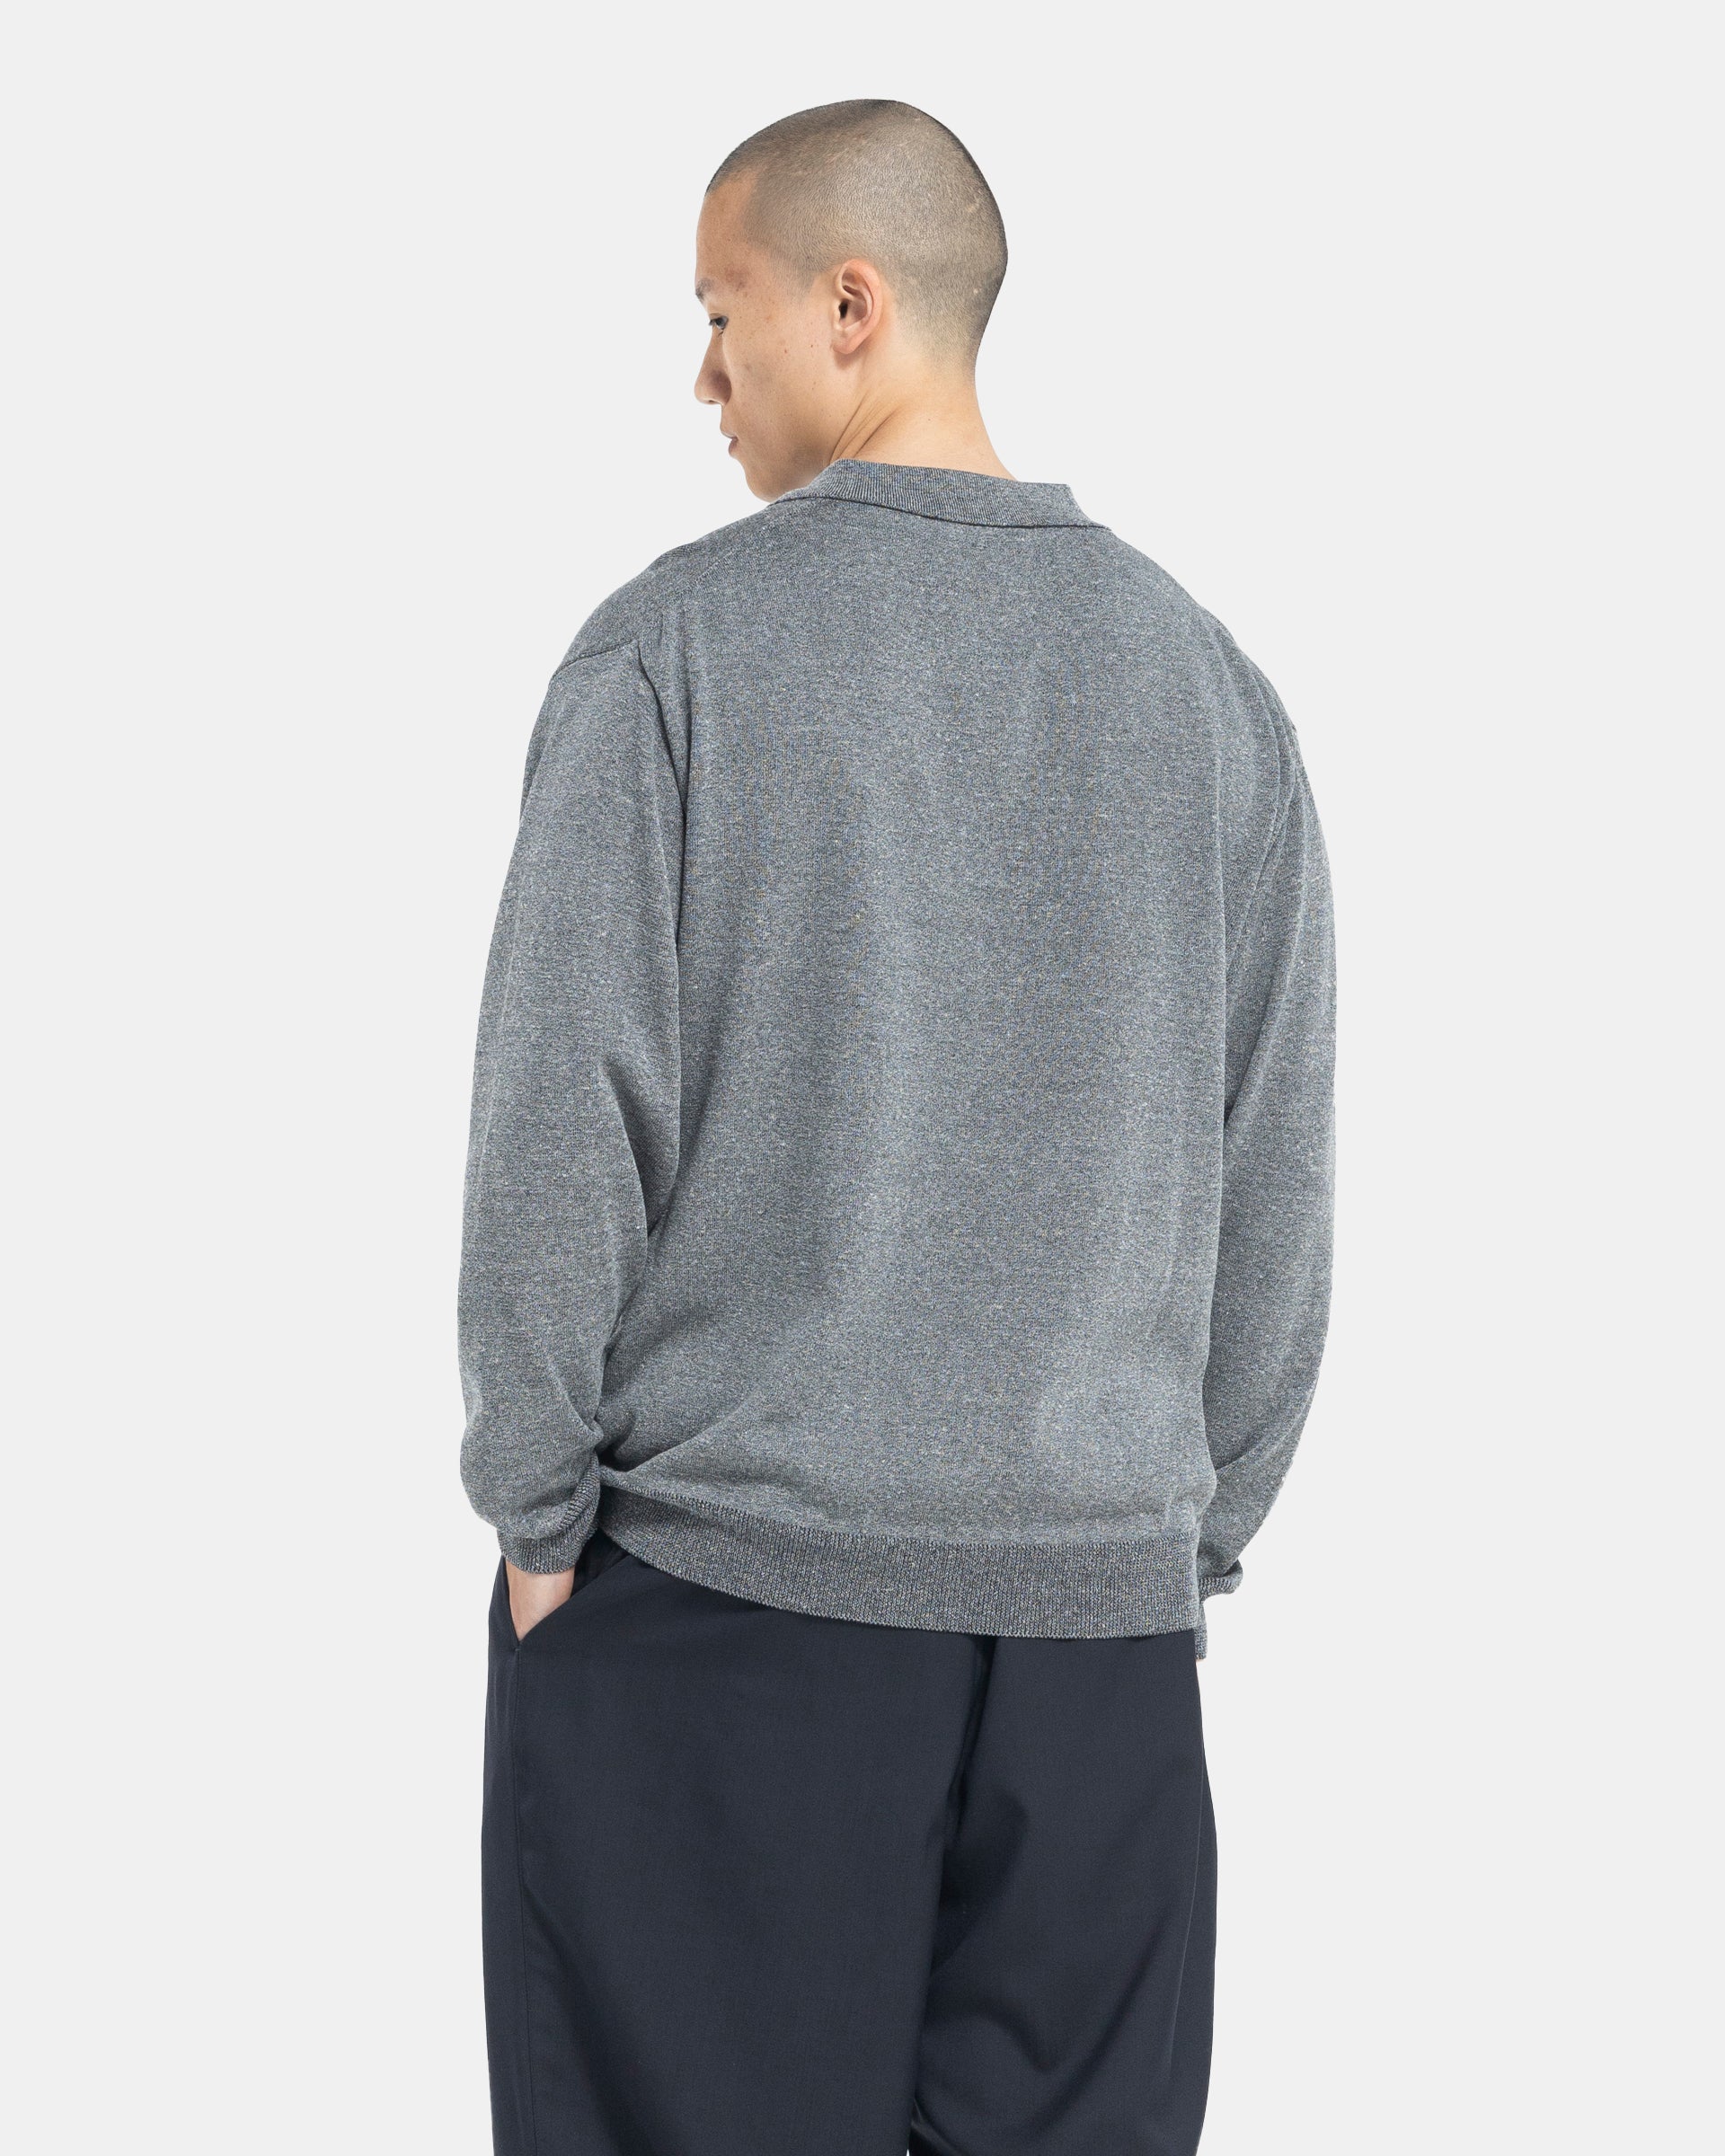 Male model wearing grey Still By Hand polo cardigan on white background